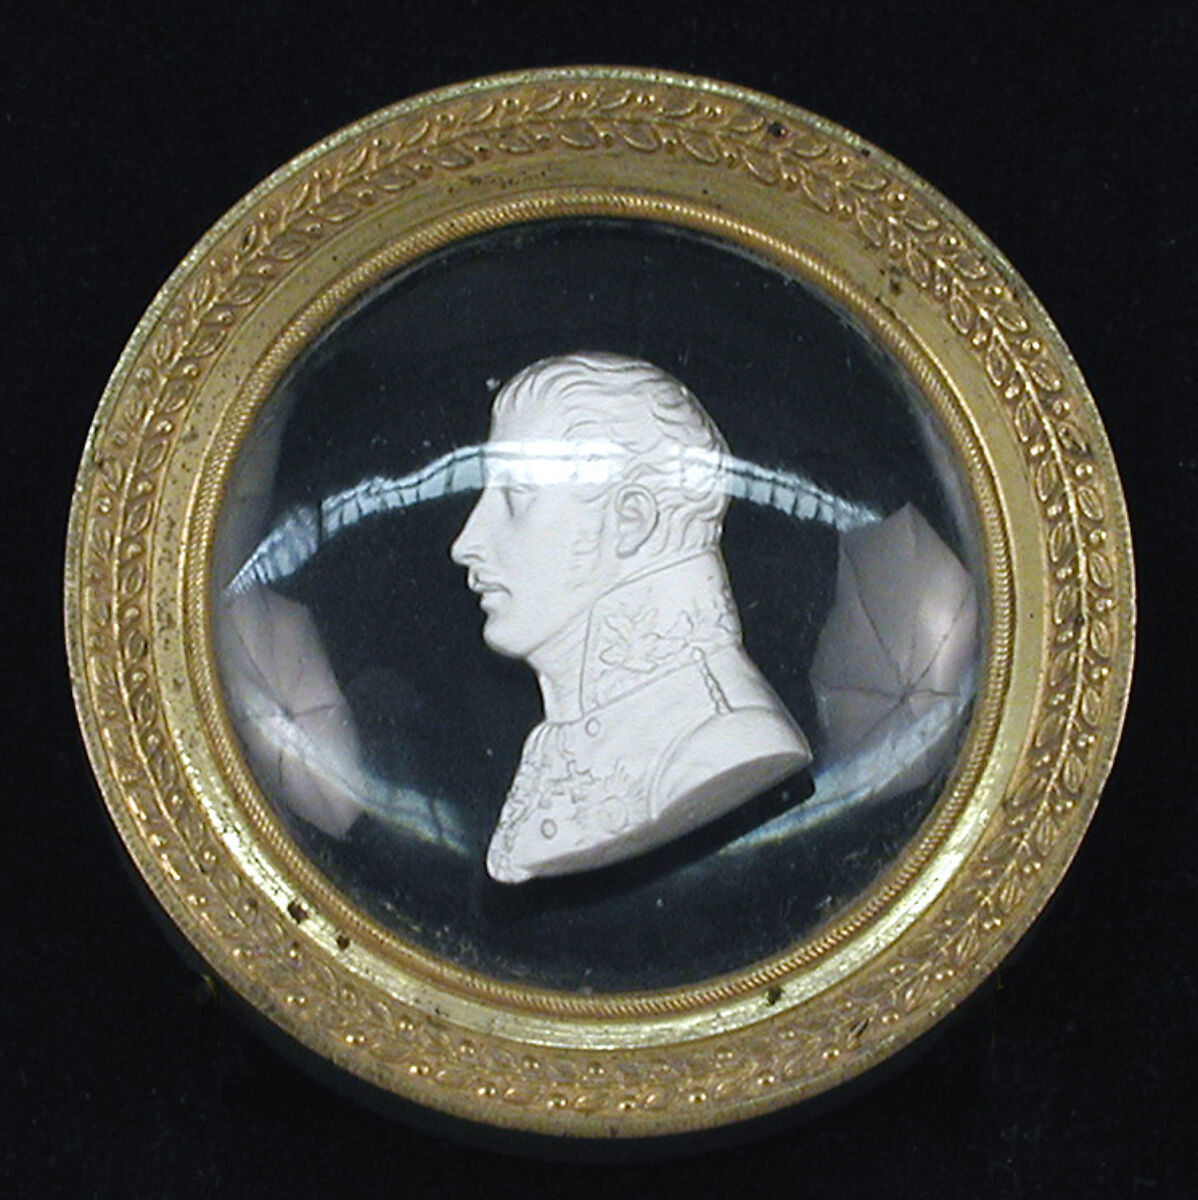 Friedrich Wilhelm III of Prussia (1770–1840, r. 1797–1840), Désprez (active 1773–after 1815), Glass, biscuit porcelain; gilded copper, French, Paris 